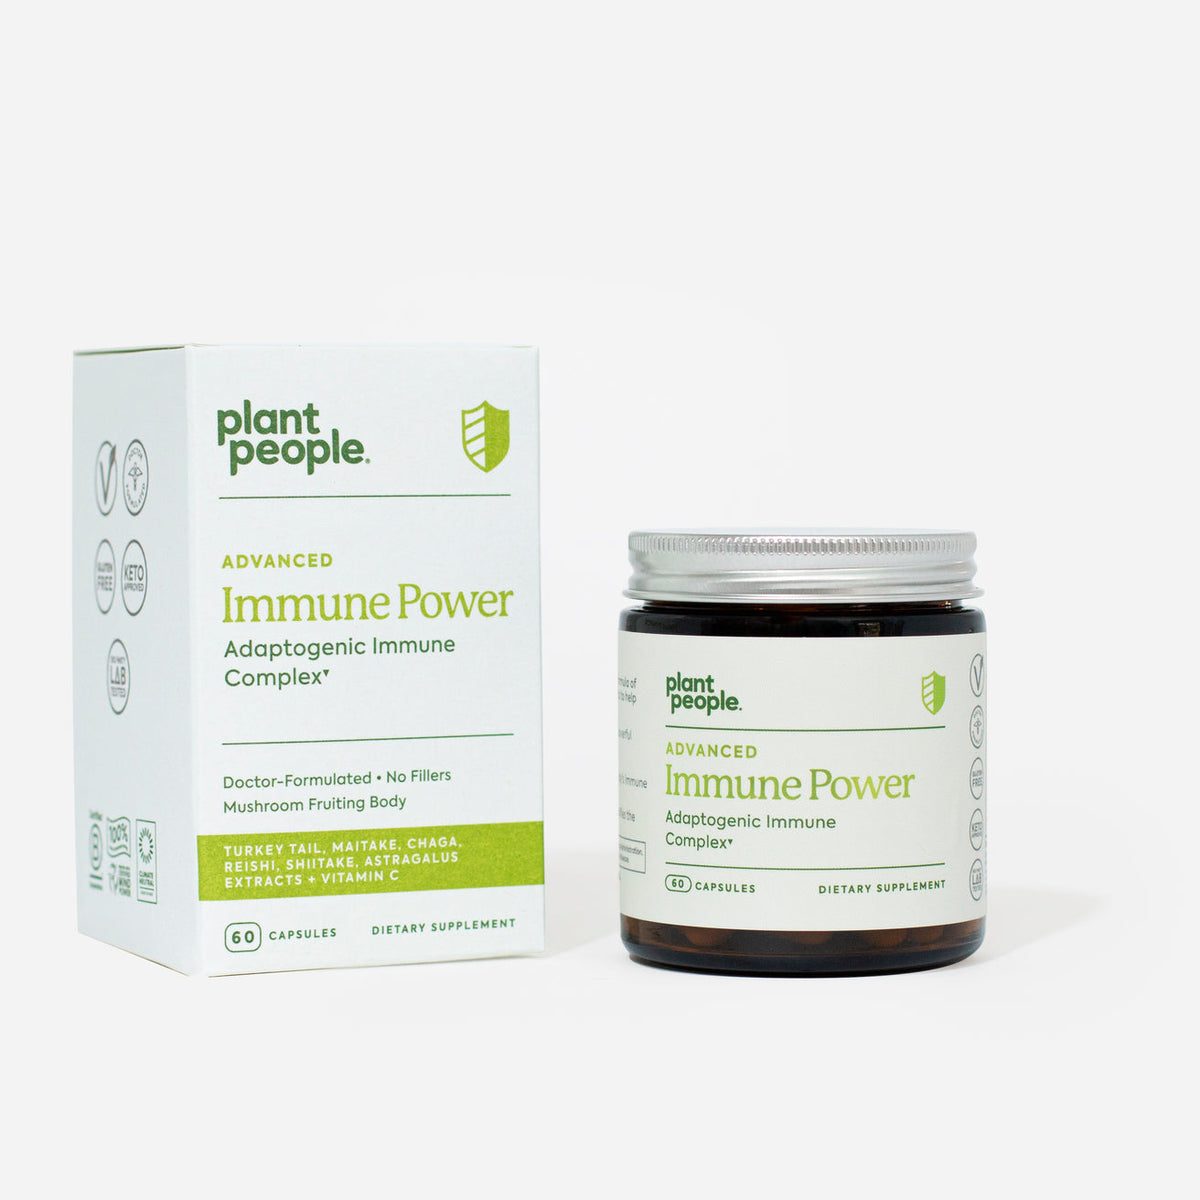 Advanced Immune Power by Plant People